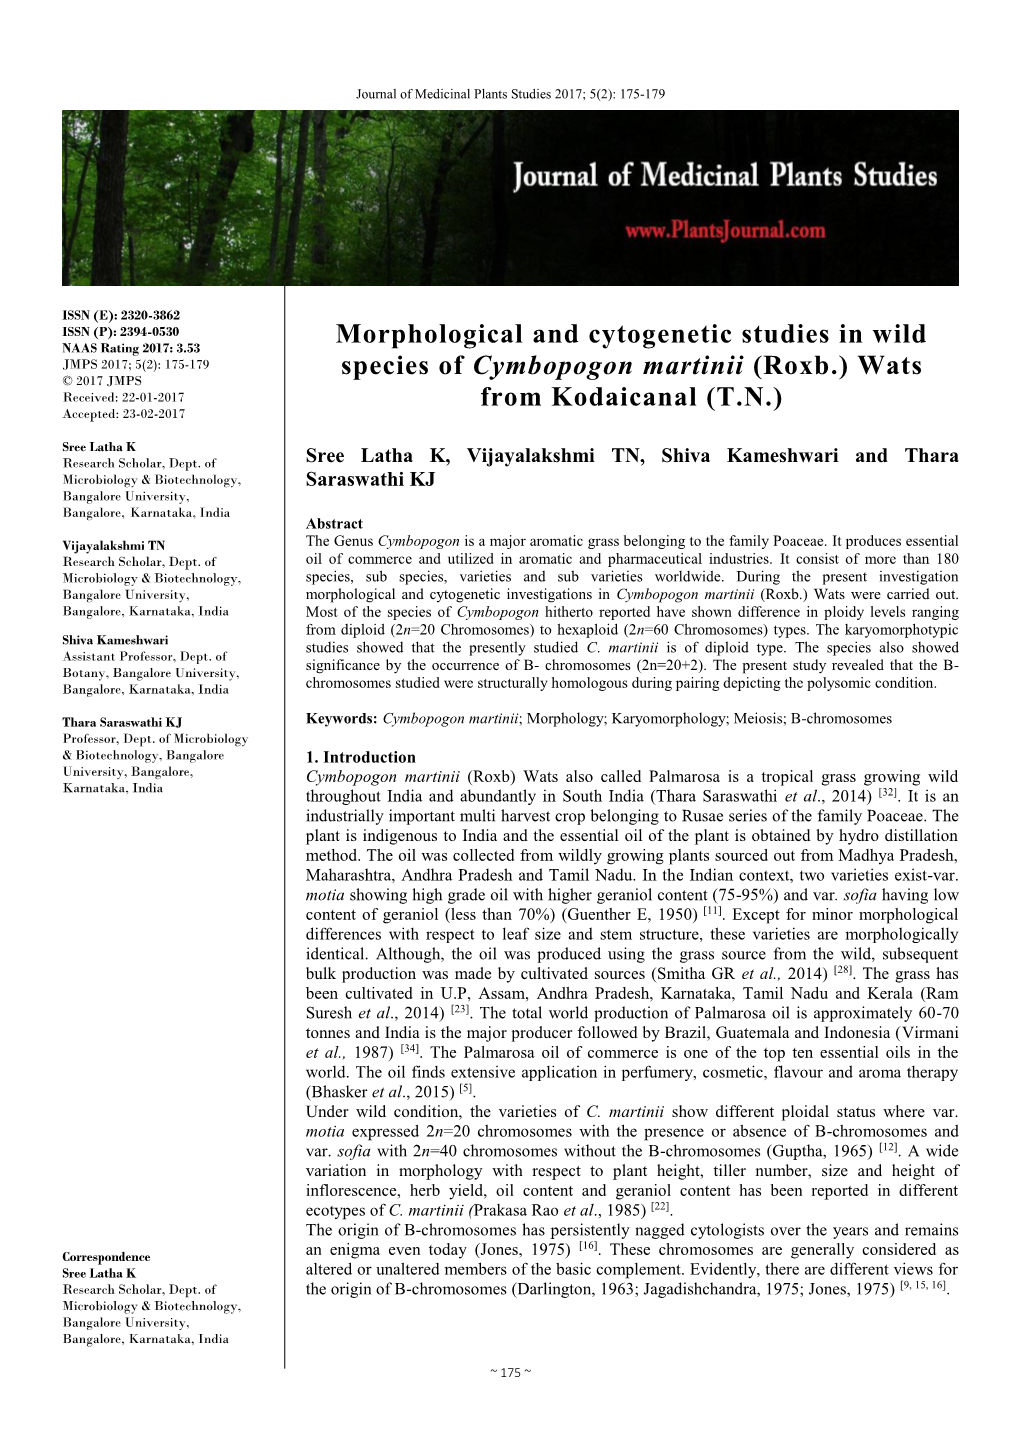 Morphological and Cytogenetic Studies in Wild Species of Cymbopogon